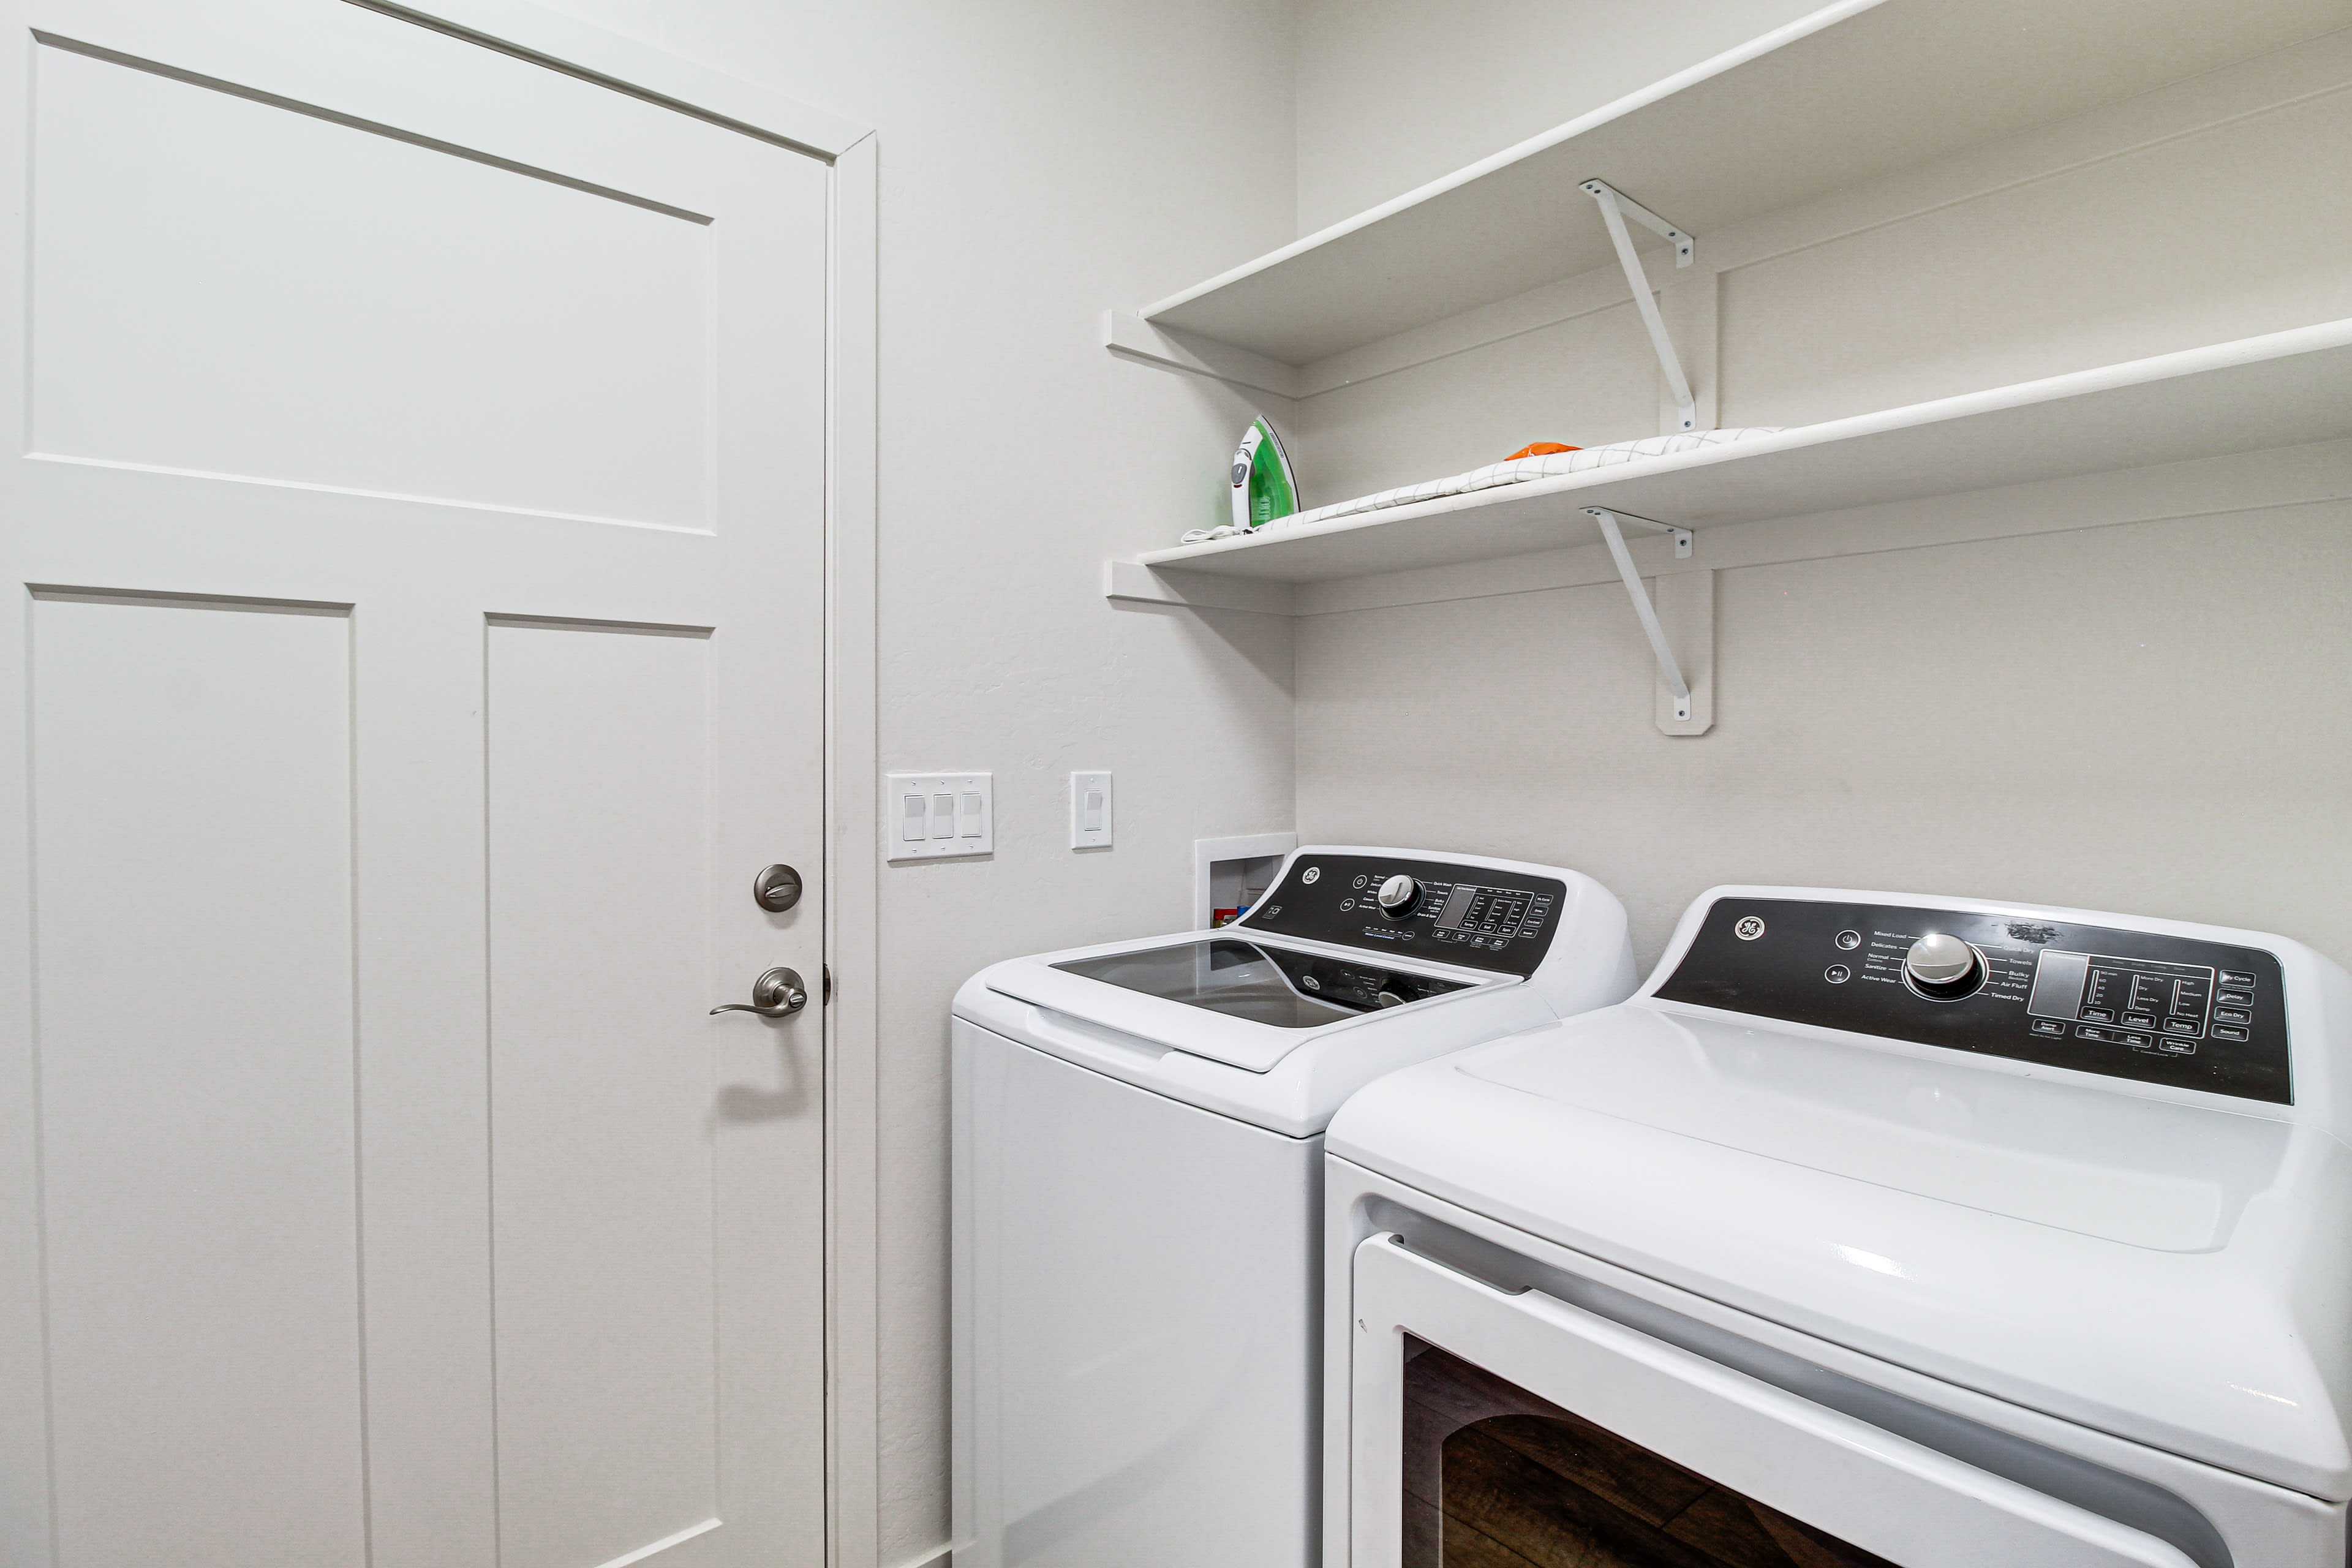 Laundry Area | Detergent Provided | 1st Floor